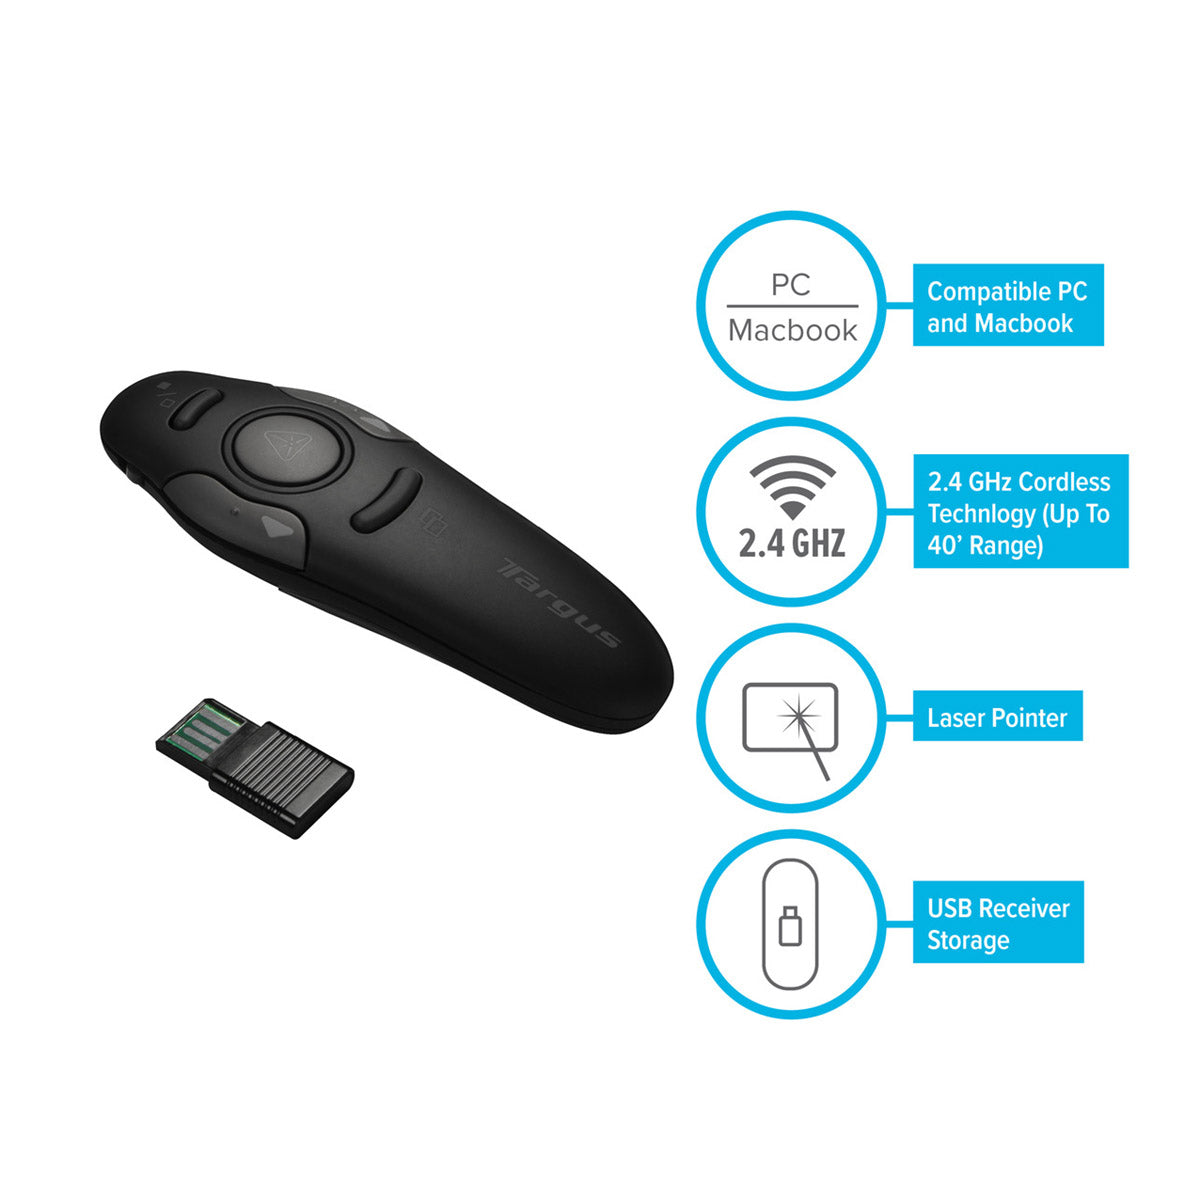 Targus P16 Wireless Presenter with Laser Pointer w/Soft-touch Material